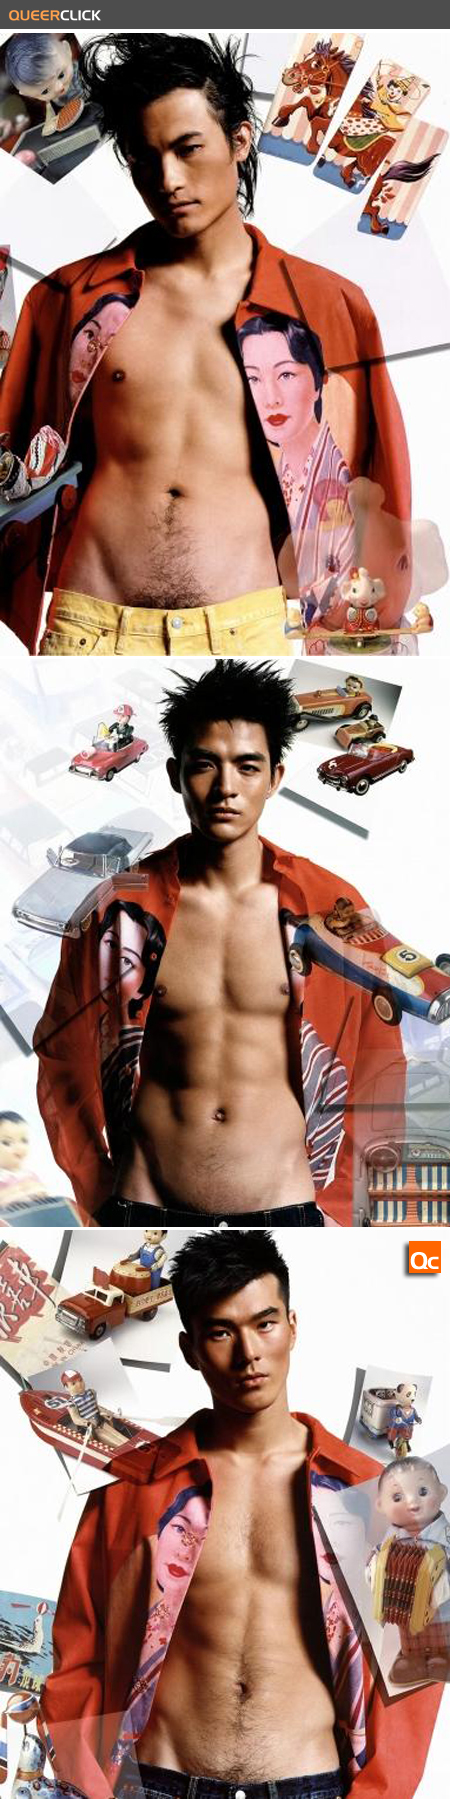 hot_asian_with_toys.jpg